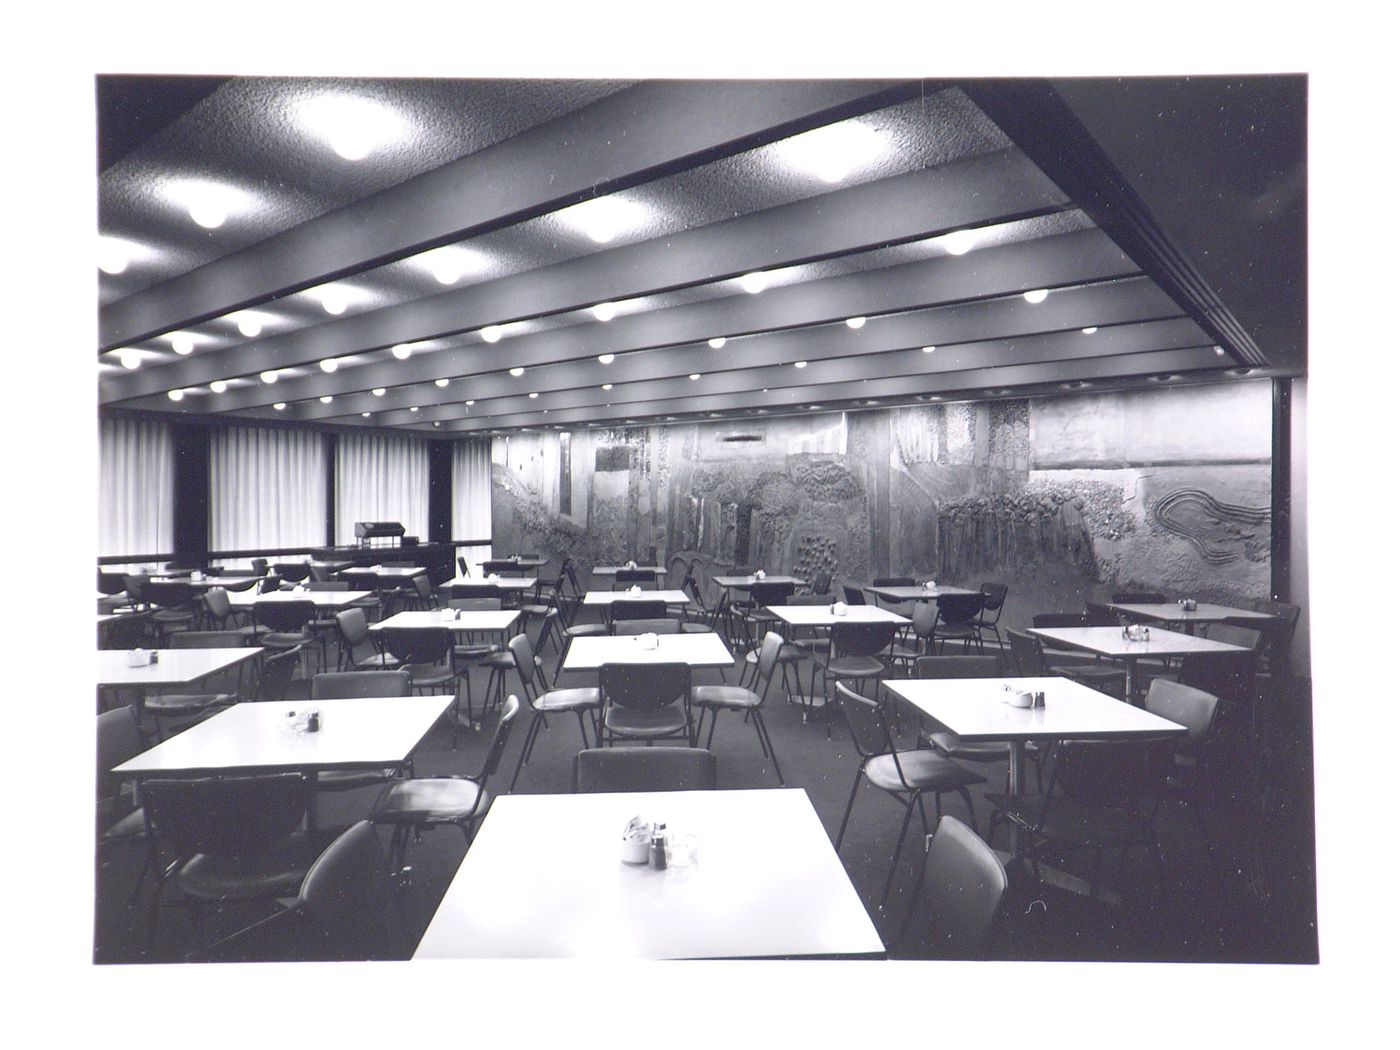 Interior view of the cafeteria area with tables and chairs, Hartford National Bank and Trust Company building, Hartford, Connecticut, United States